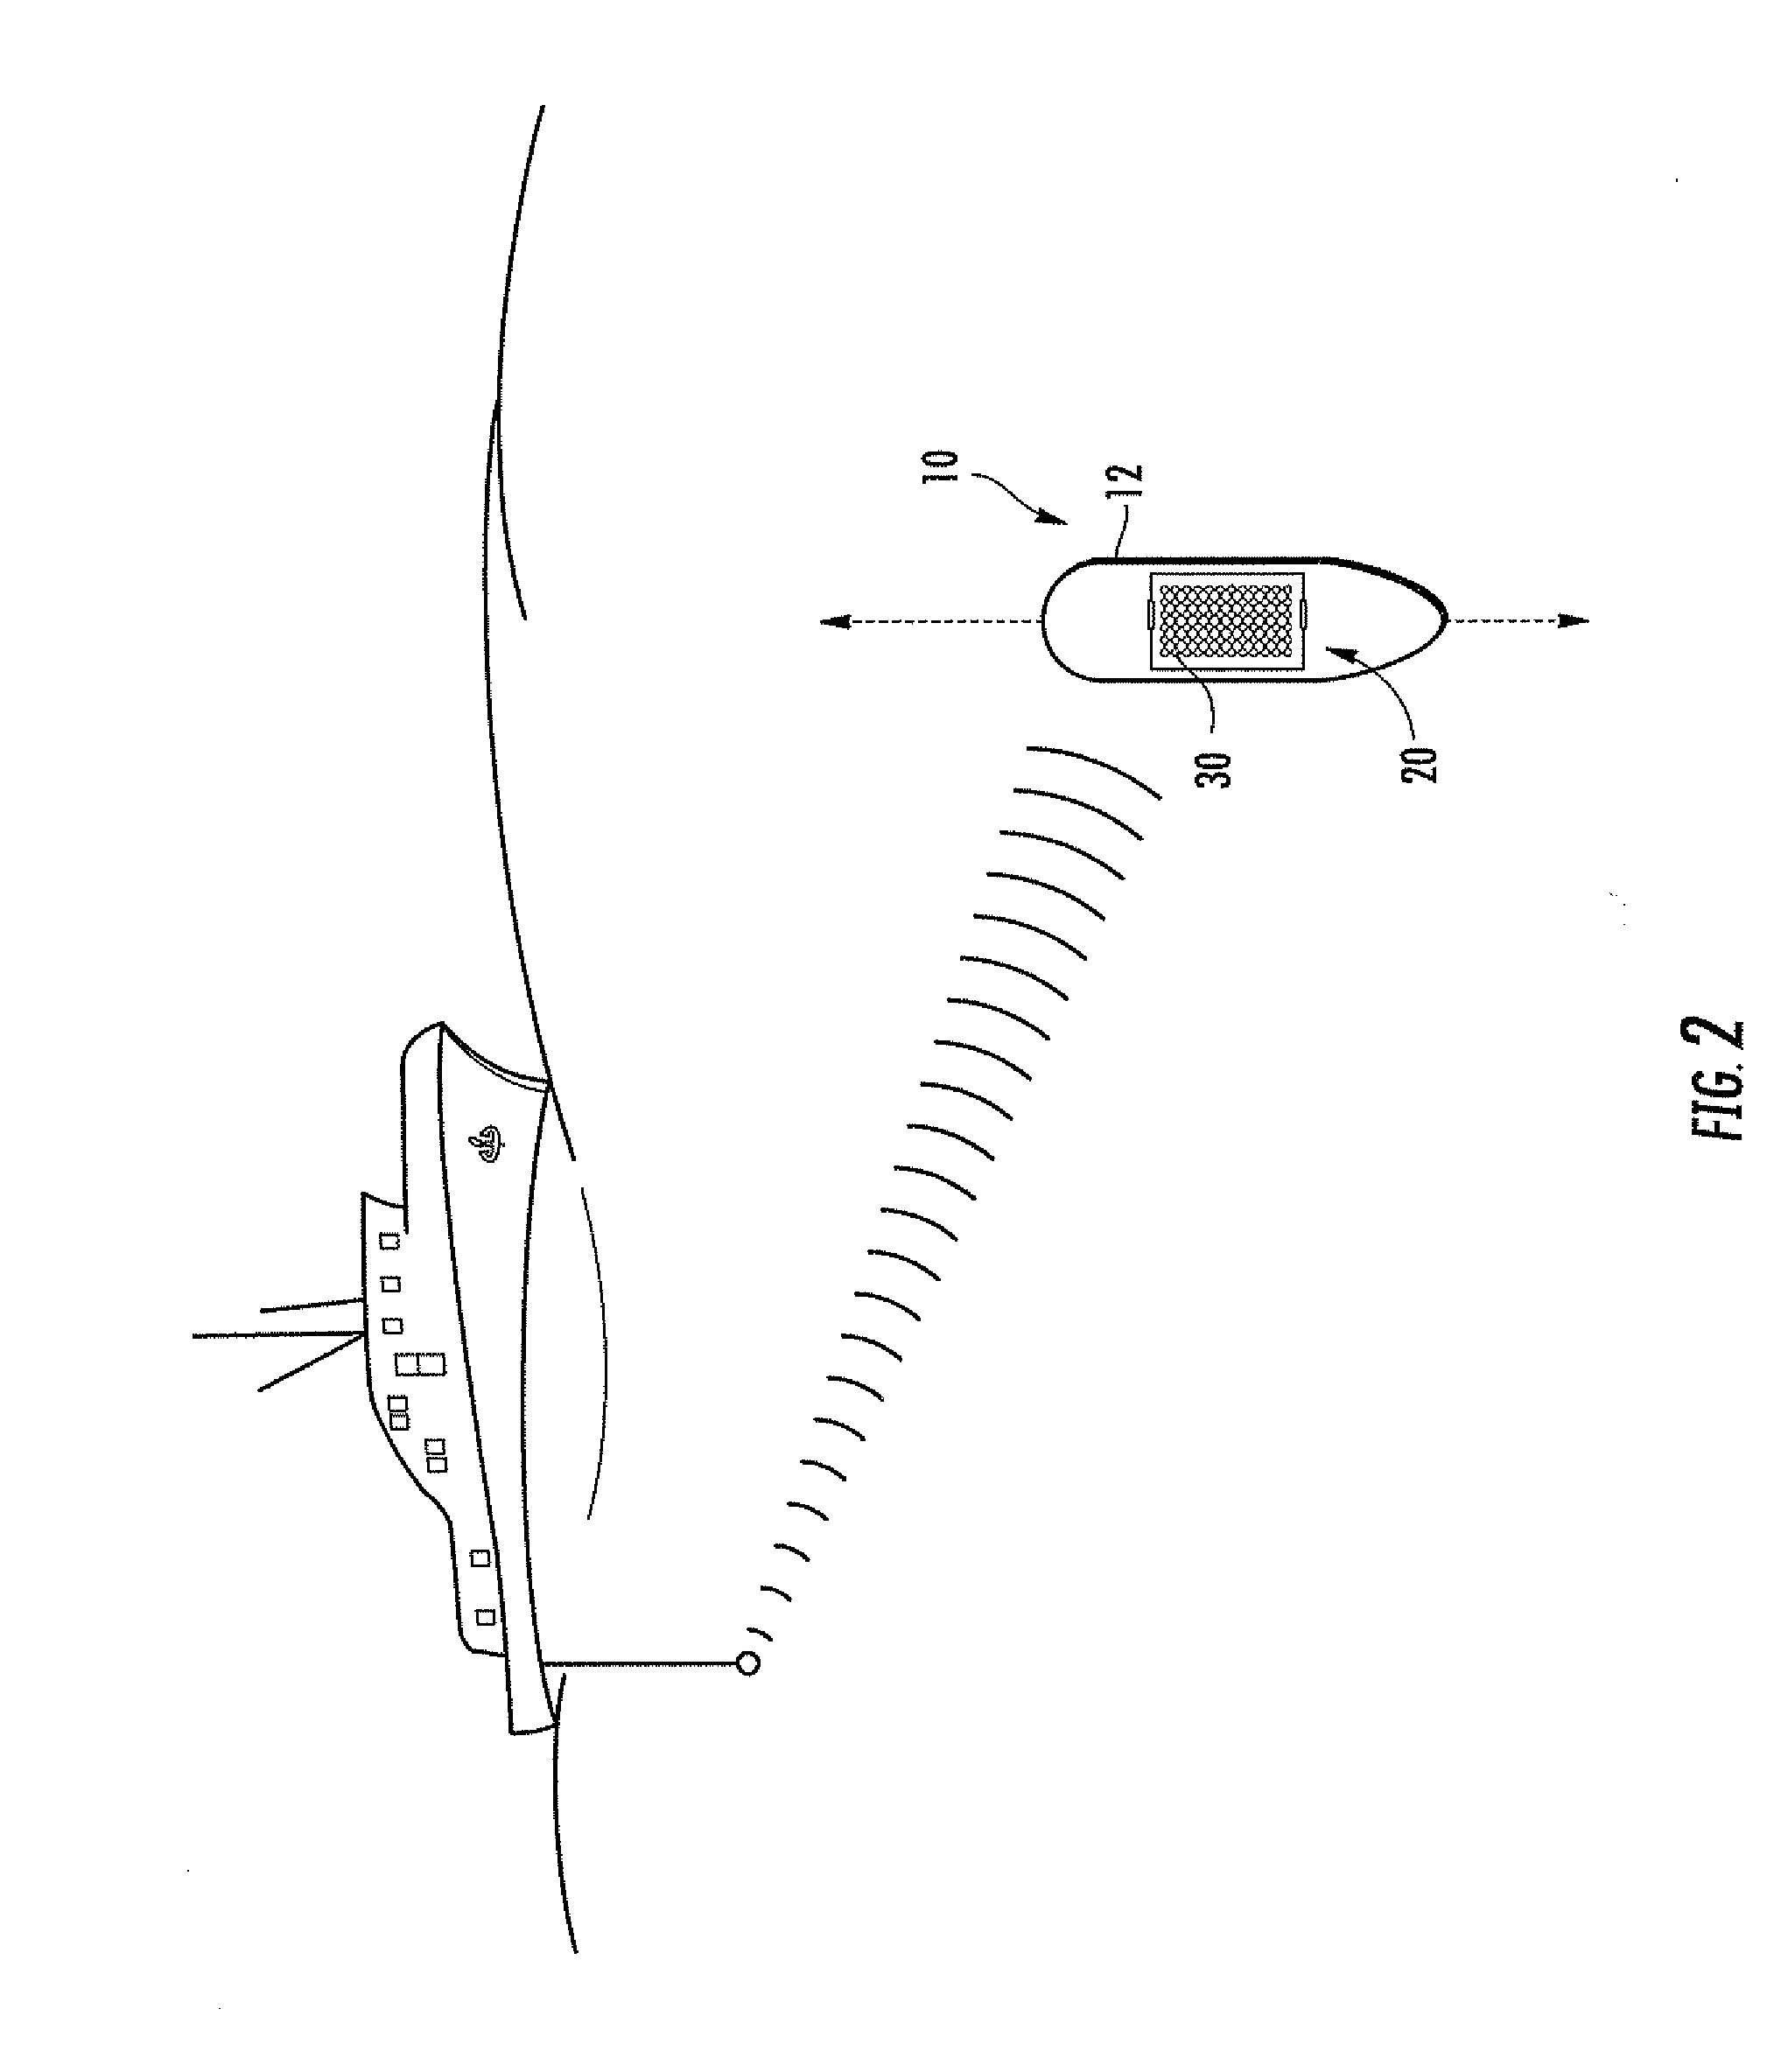 Buoyancy system for an underwater device and associated methods for operating the same